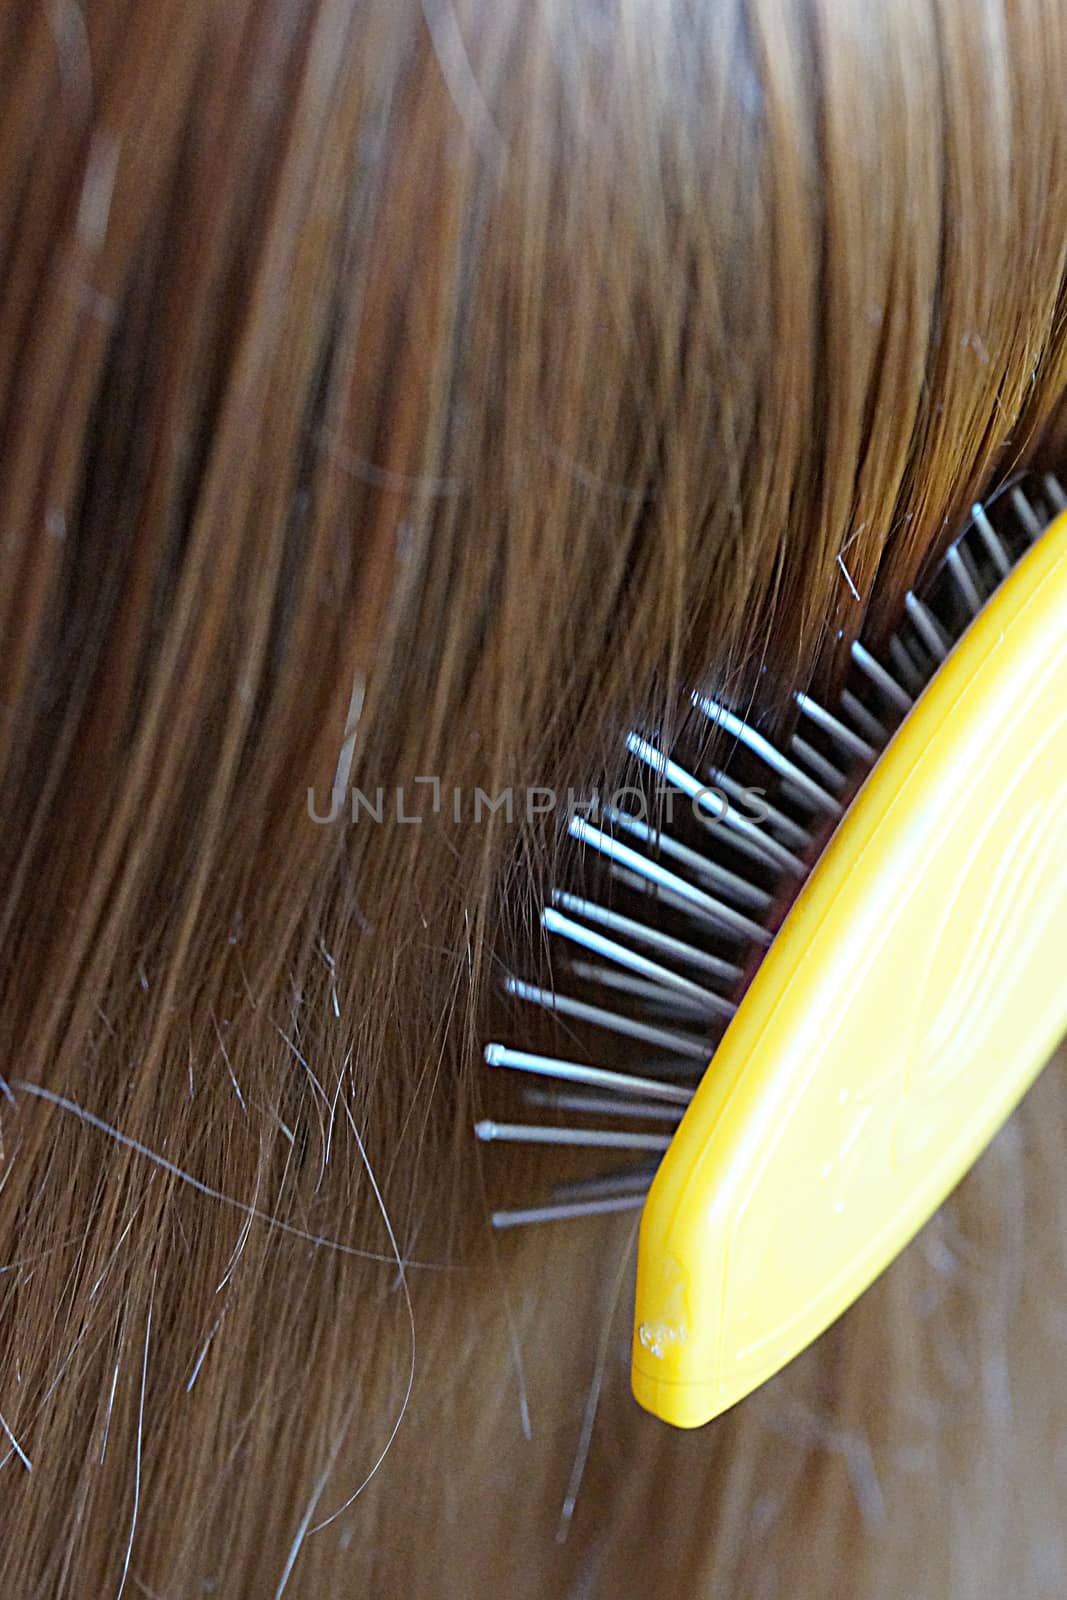 woman combing red hair, close up rear view by Annado